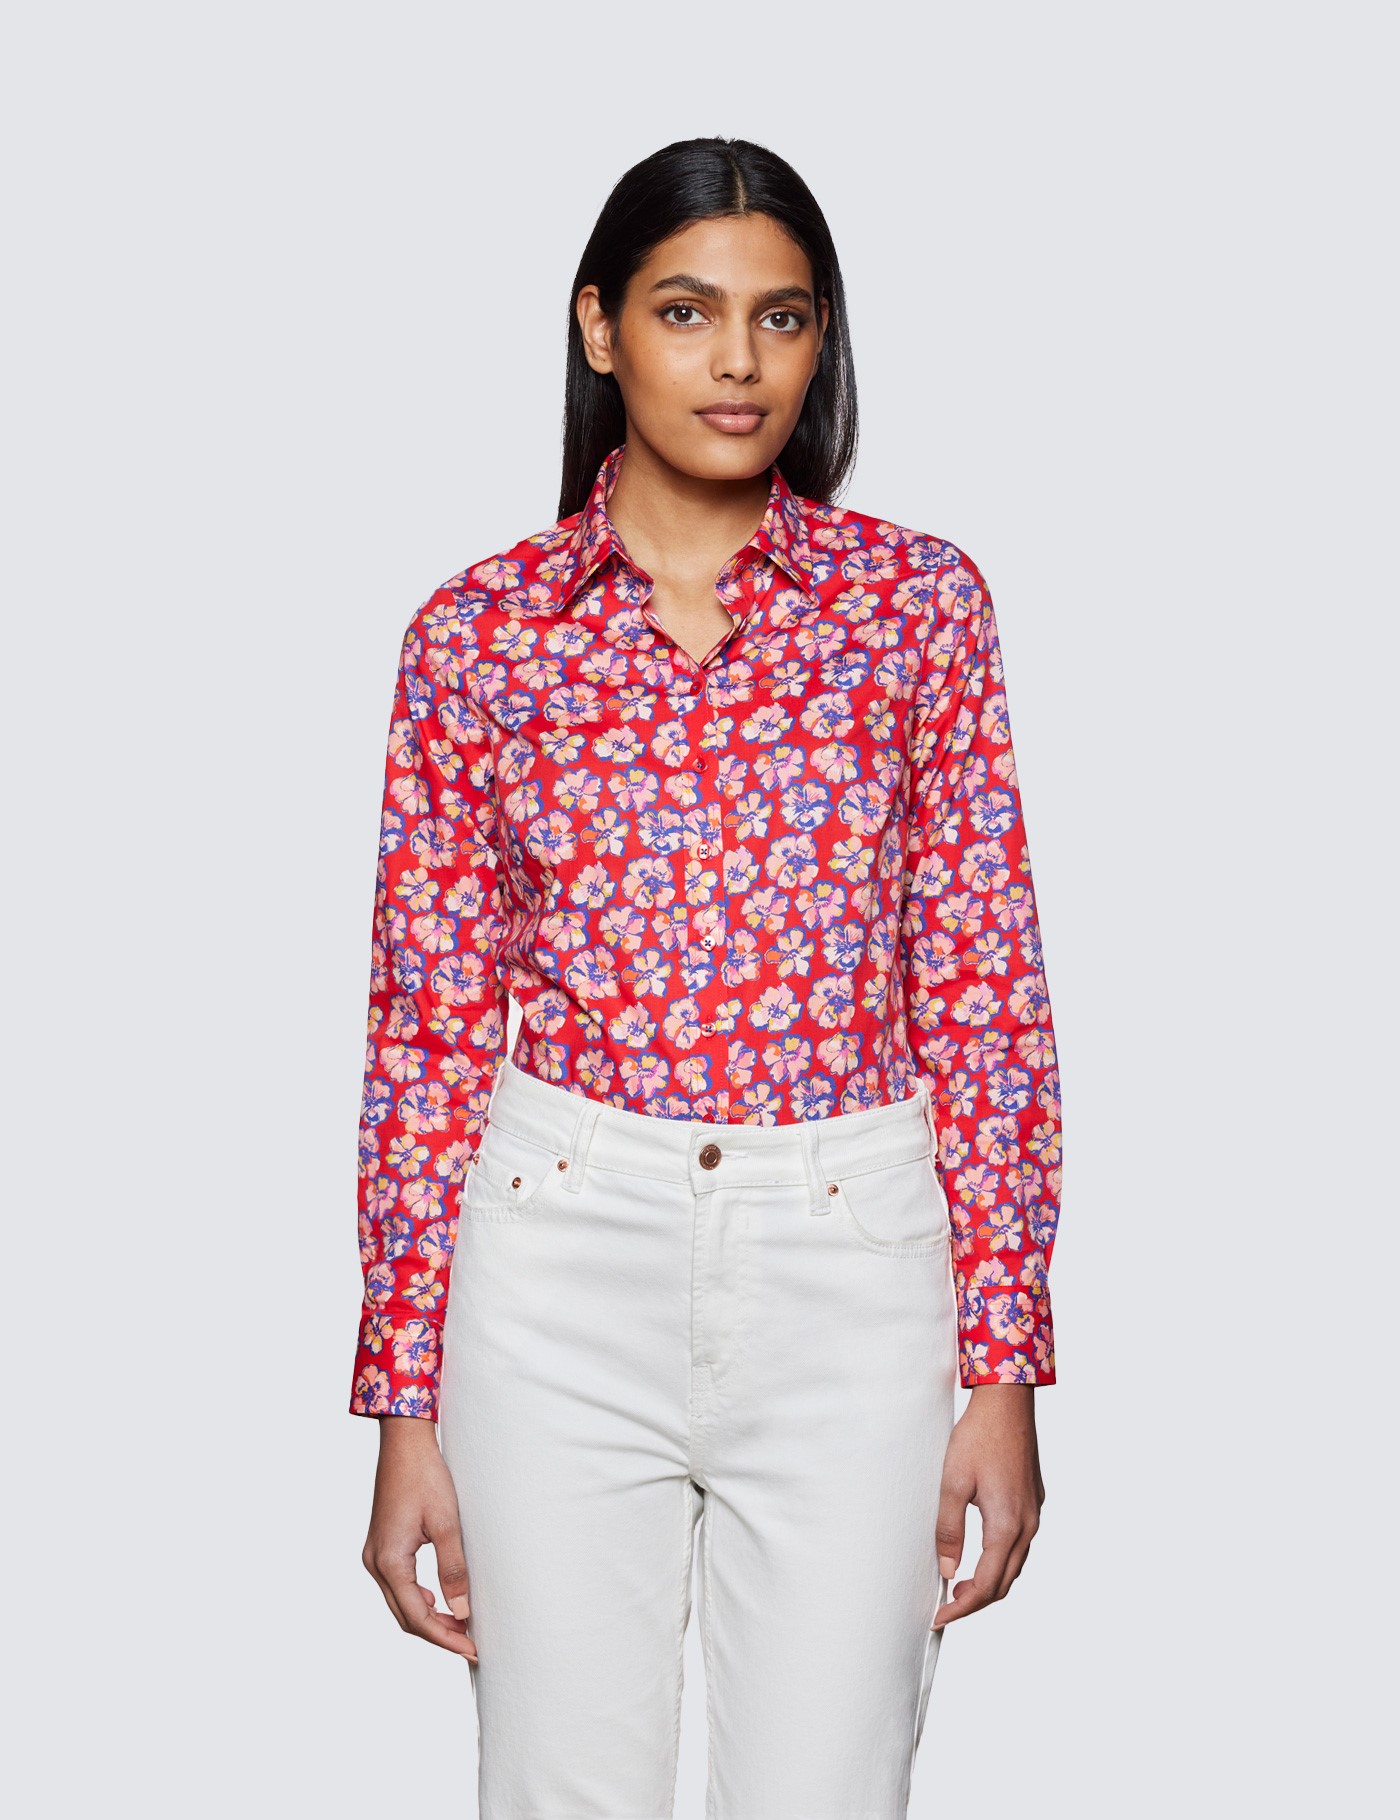 Hawes & Curtis Women's Navy & Pink Floral Print Fitted Cotton Stretch Shirt